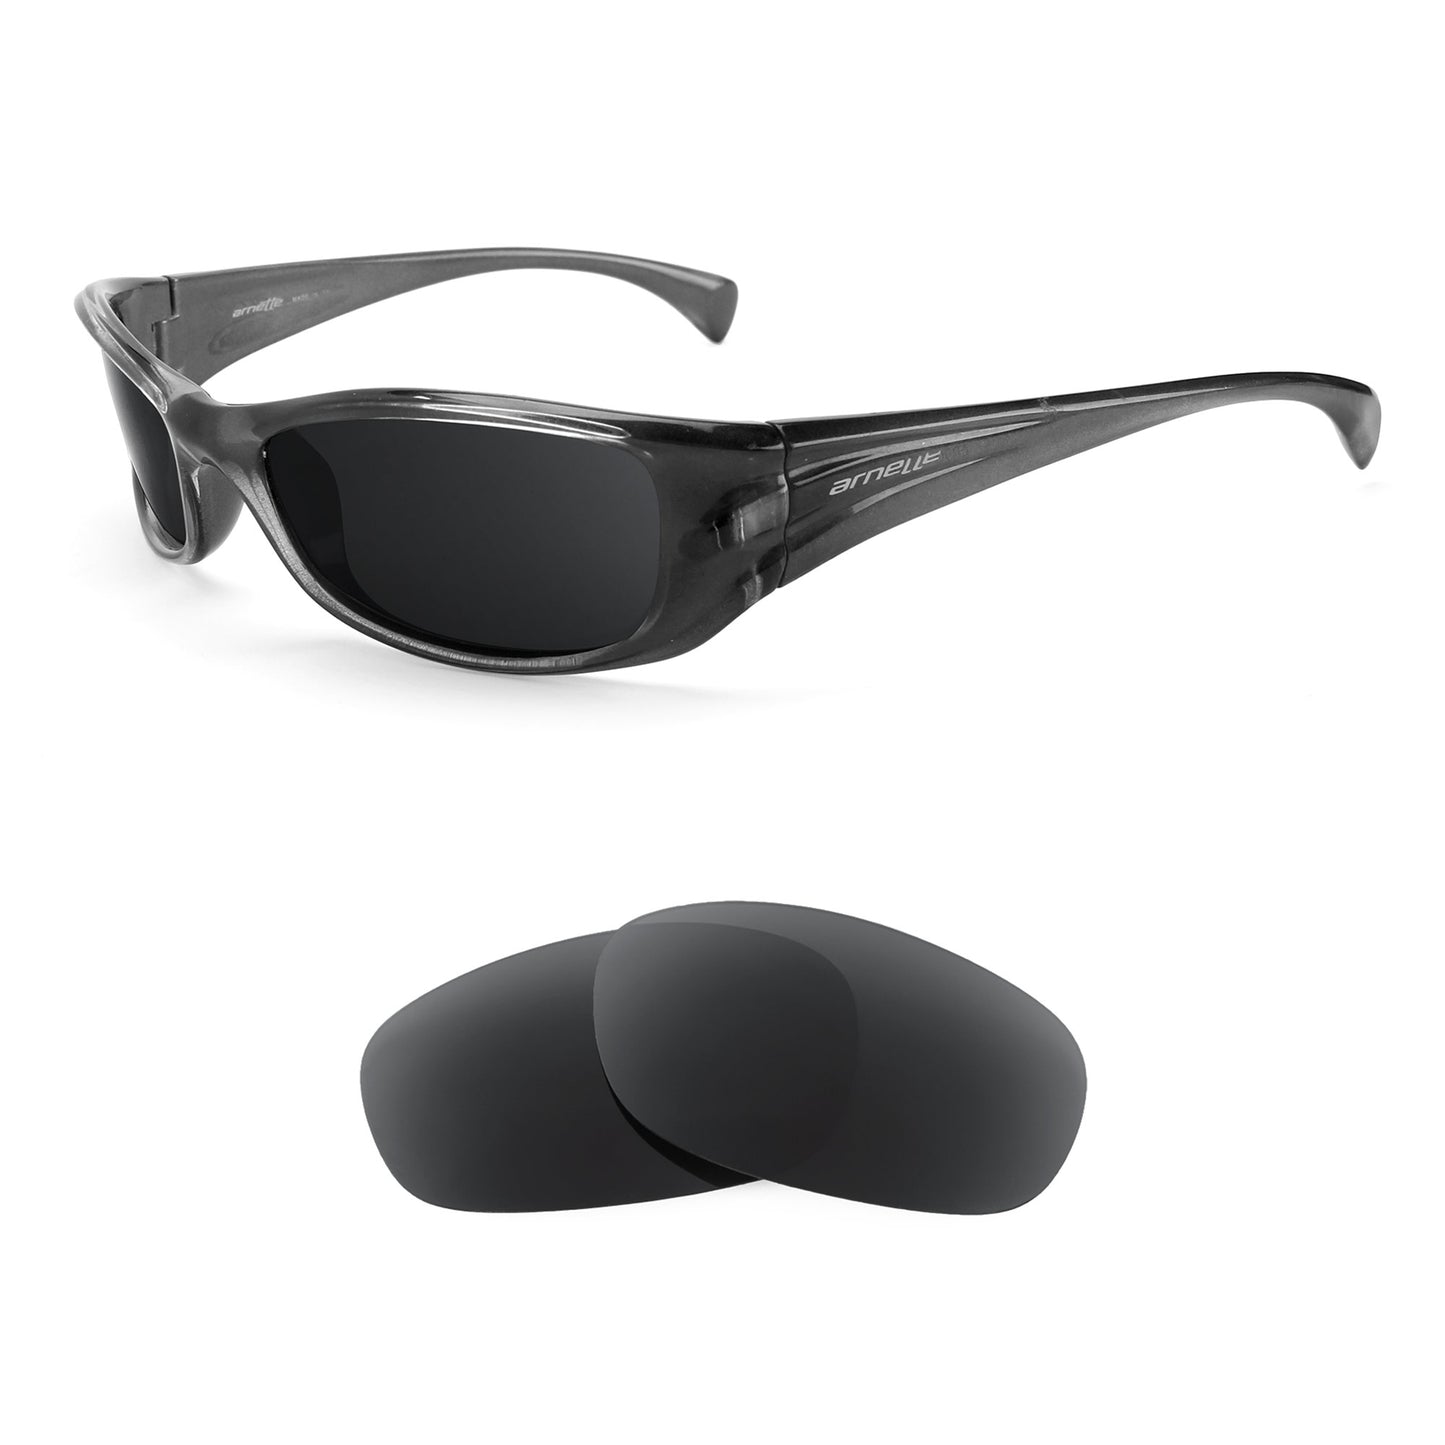 Arnette Stance AN4020 sunglasses with replacement lenses